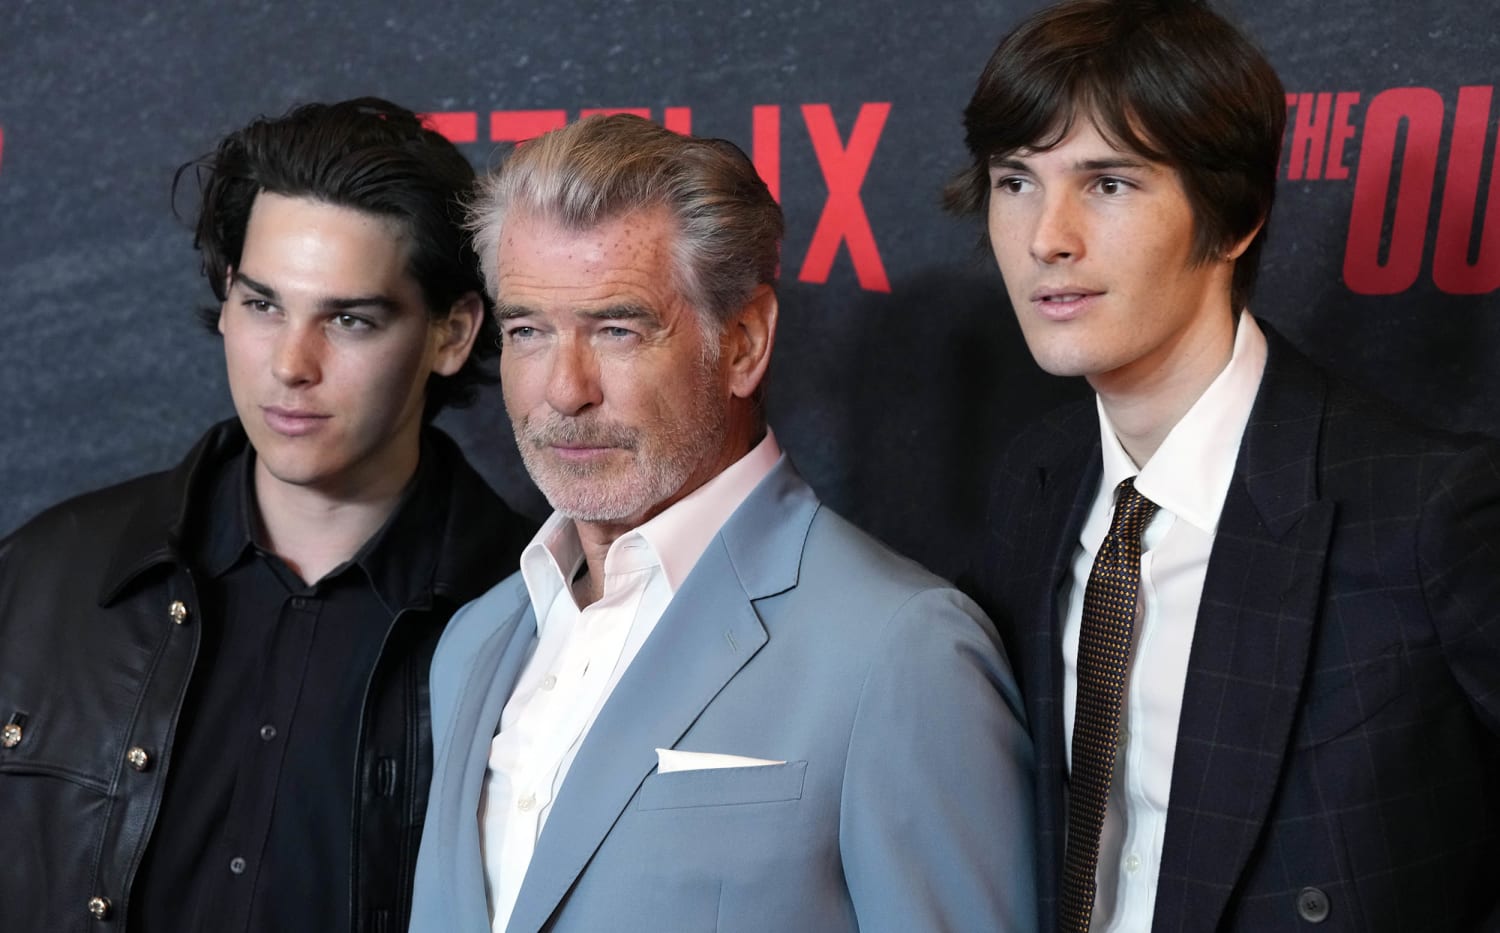 How Many Kids Does Pierce Brosnan Have?